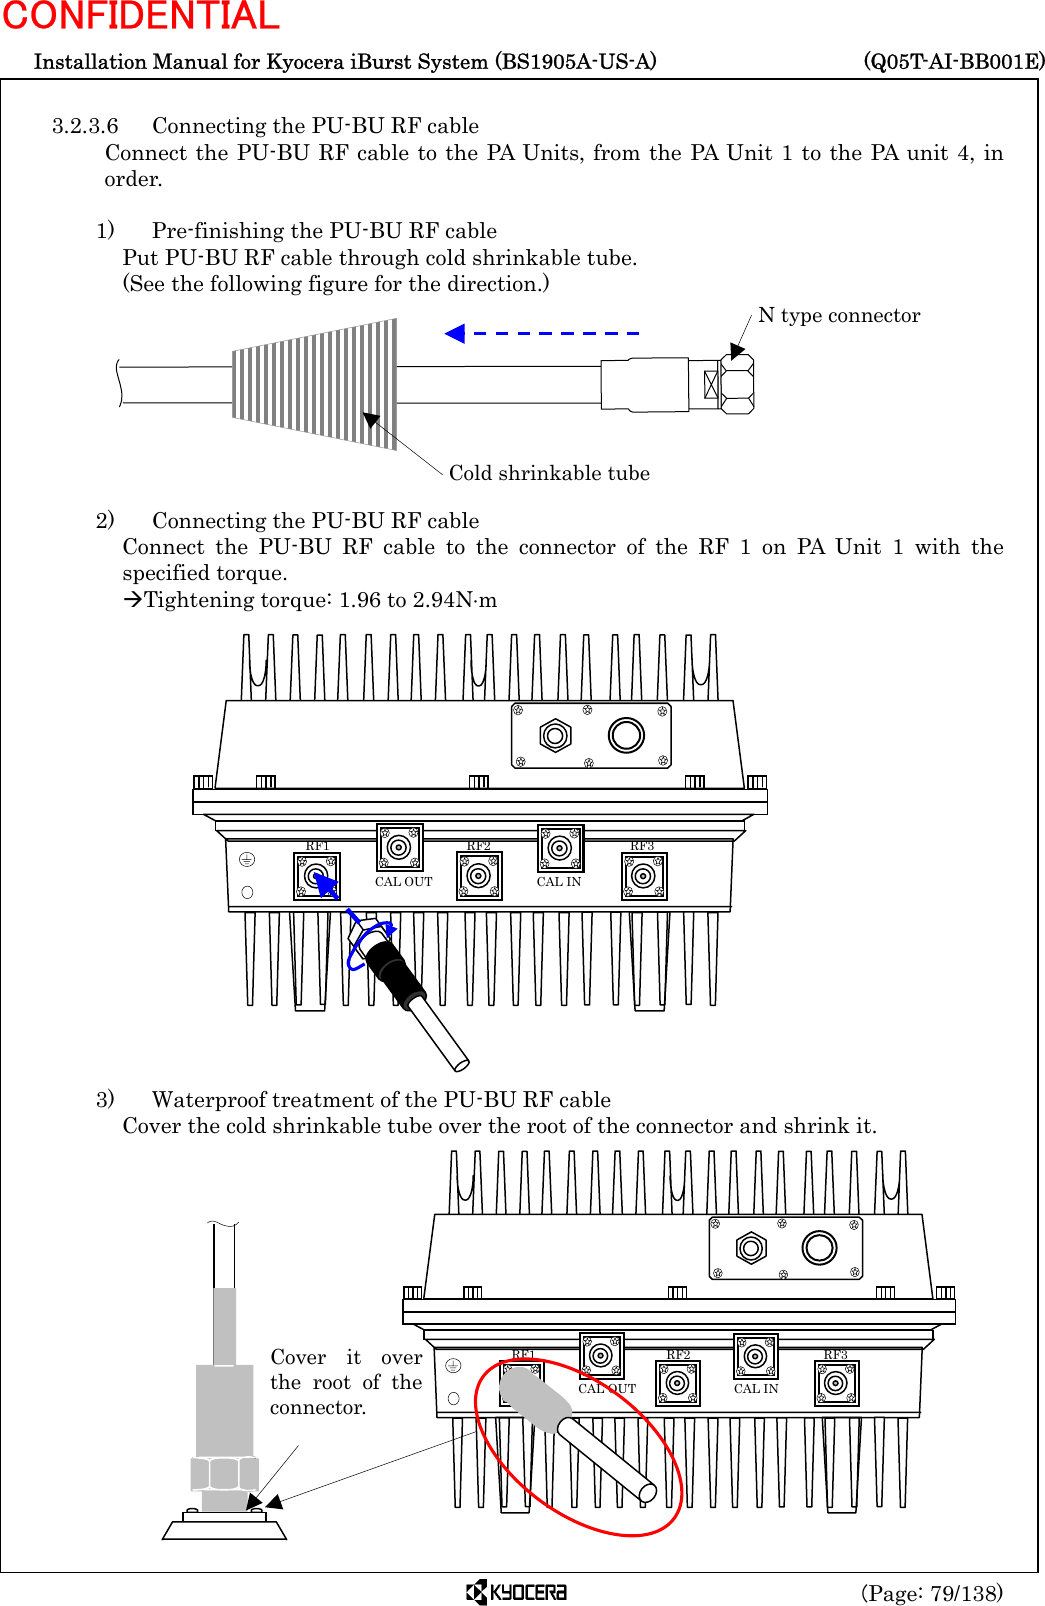  Installation Manual for Kyocera iBurst System (BS1905A-US-A)     (Q05T-AI-BB001E) (Page: 79/138) CONFIDENTIAL  3.2.3.6  Connecting the PU-BU RF cable Connect the PU-BU RF cable to the PA Units, from the PA Unit 1 to the PA unit 4, in order.  1)    Pre-finishing the PU-BU RF cable Put PU-BU RF cable through cold shrinkable tube.   (See the following figure for the direction.)         2)    Connecting the PU-BU RF cable Connect the PU-BU RF cable to the connector of the RF 1 on PA Unit 1 with the specified torque. ÆTightening torque: 1.96 to 2.94N⋅m                   3)    Waterproof treatment of the PU-BU RF cable Cover the cold shrinkable tube over the root of the connector and shrink it.                 Cold shrinkable tube N type connector   RF3 RF2 RF1 CAL OUT  CAL IN Cover it overthe root of theconnector.  RF3 RF2 RF1 CAL OUT  CAL IN 